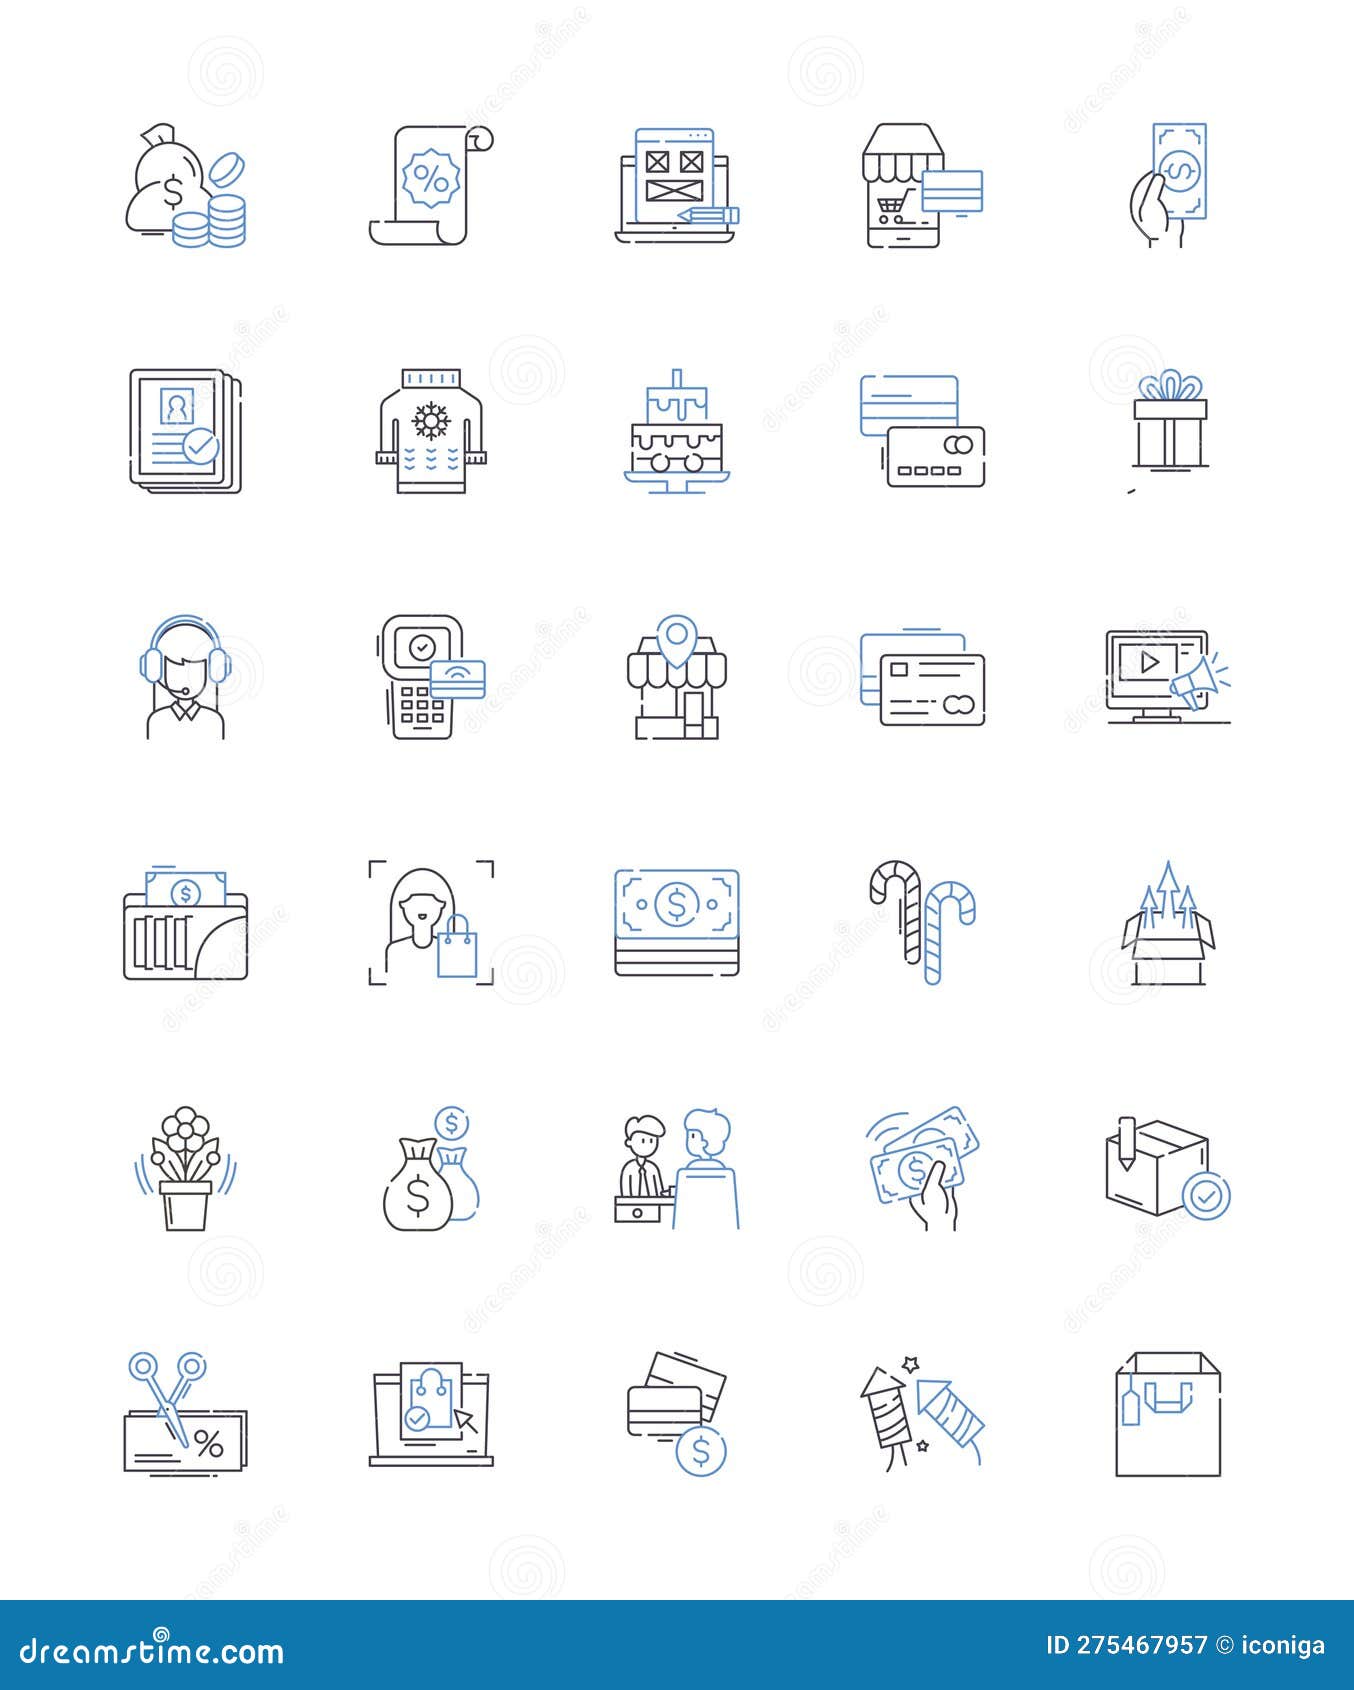 Supermarket Line Icons Collection. Groceries, Aisles, Produce, Checkout ...